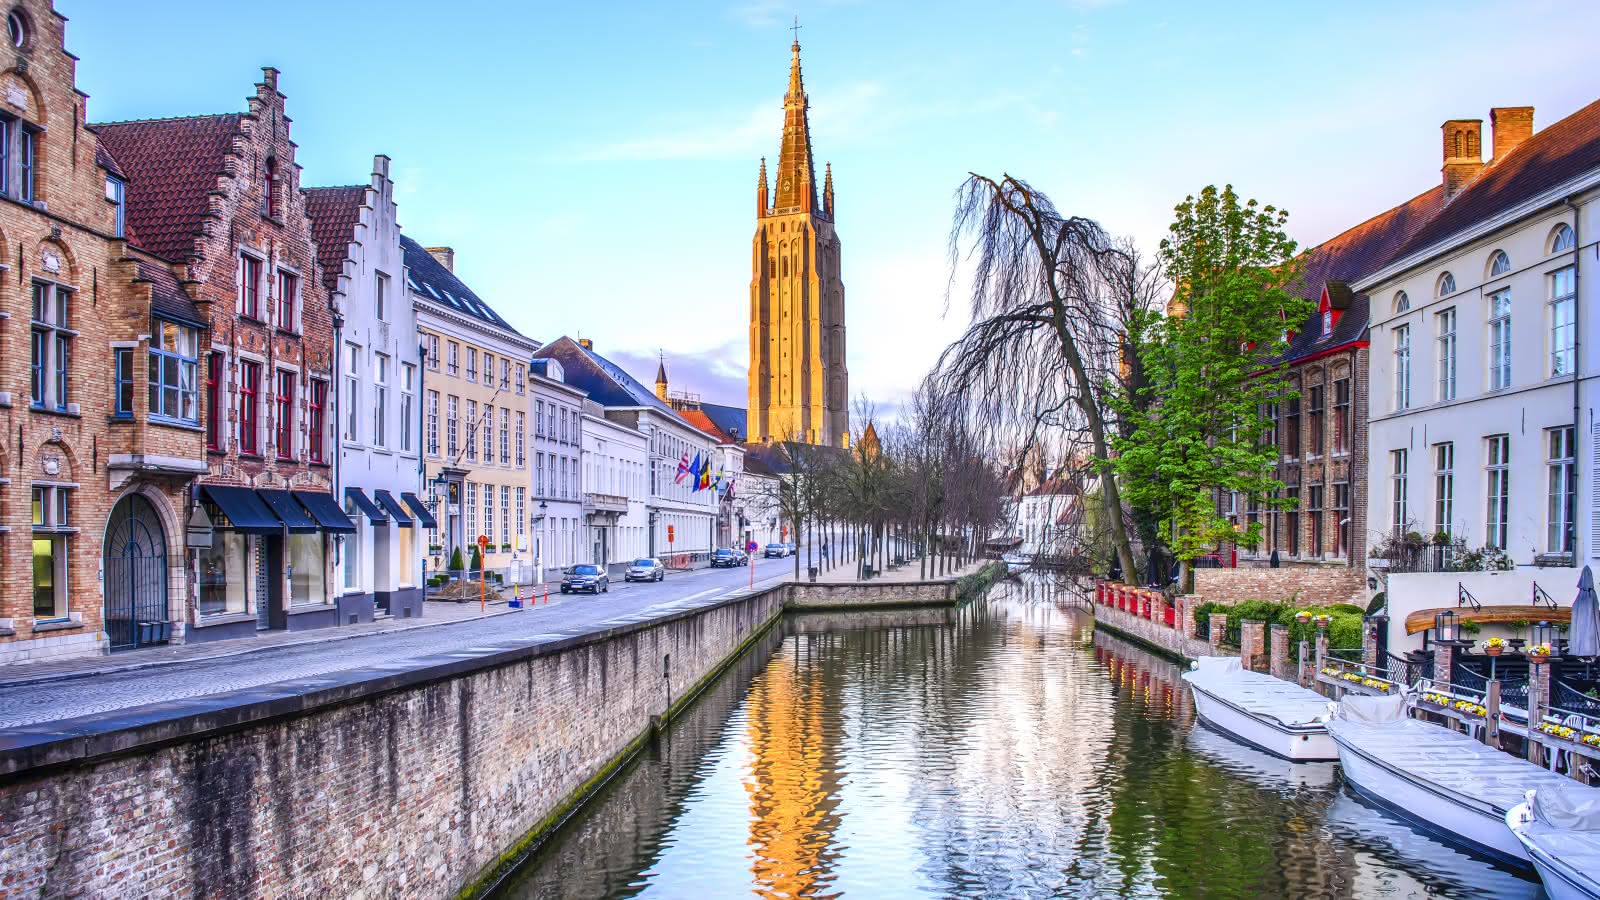 tour to bruges from brussels